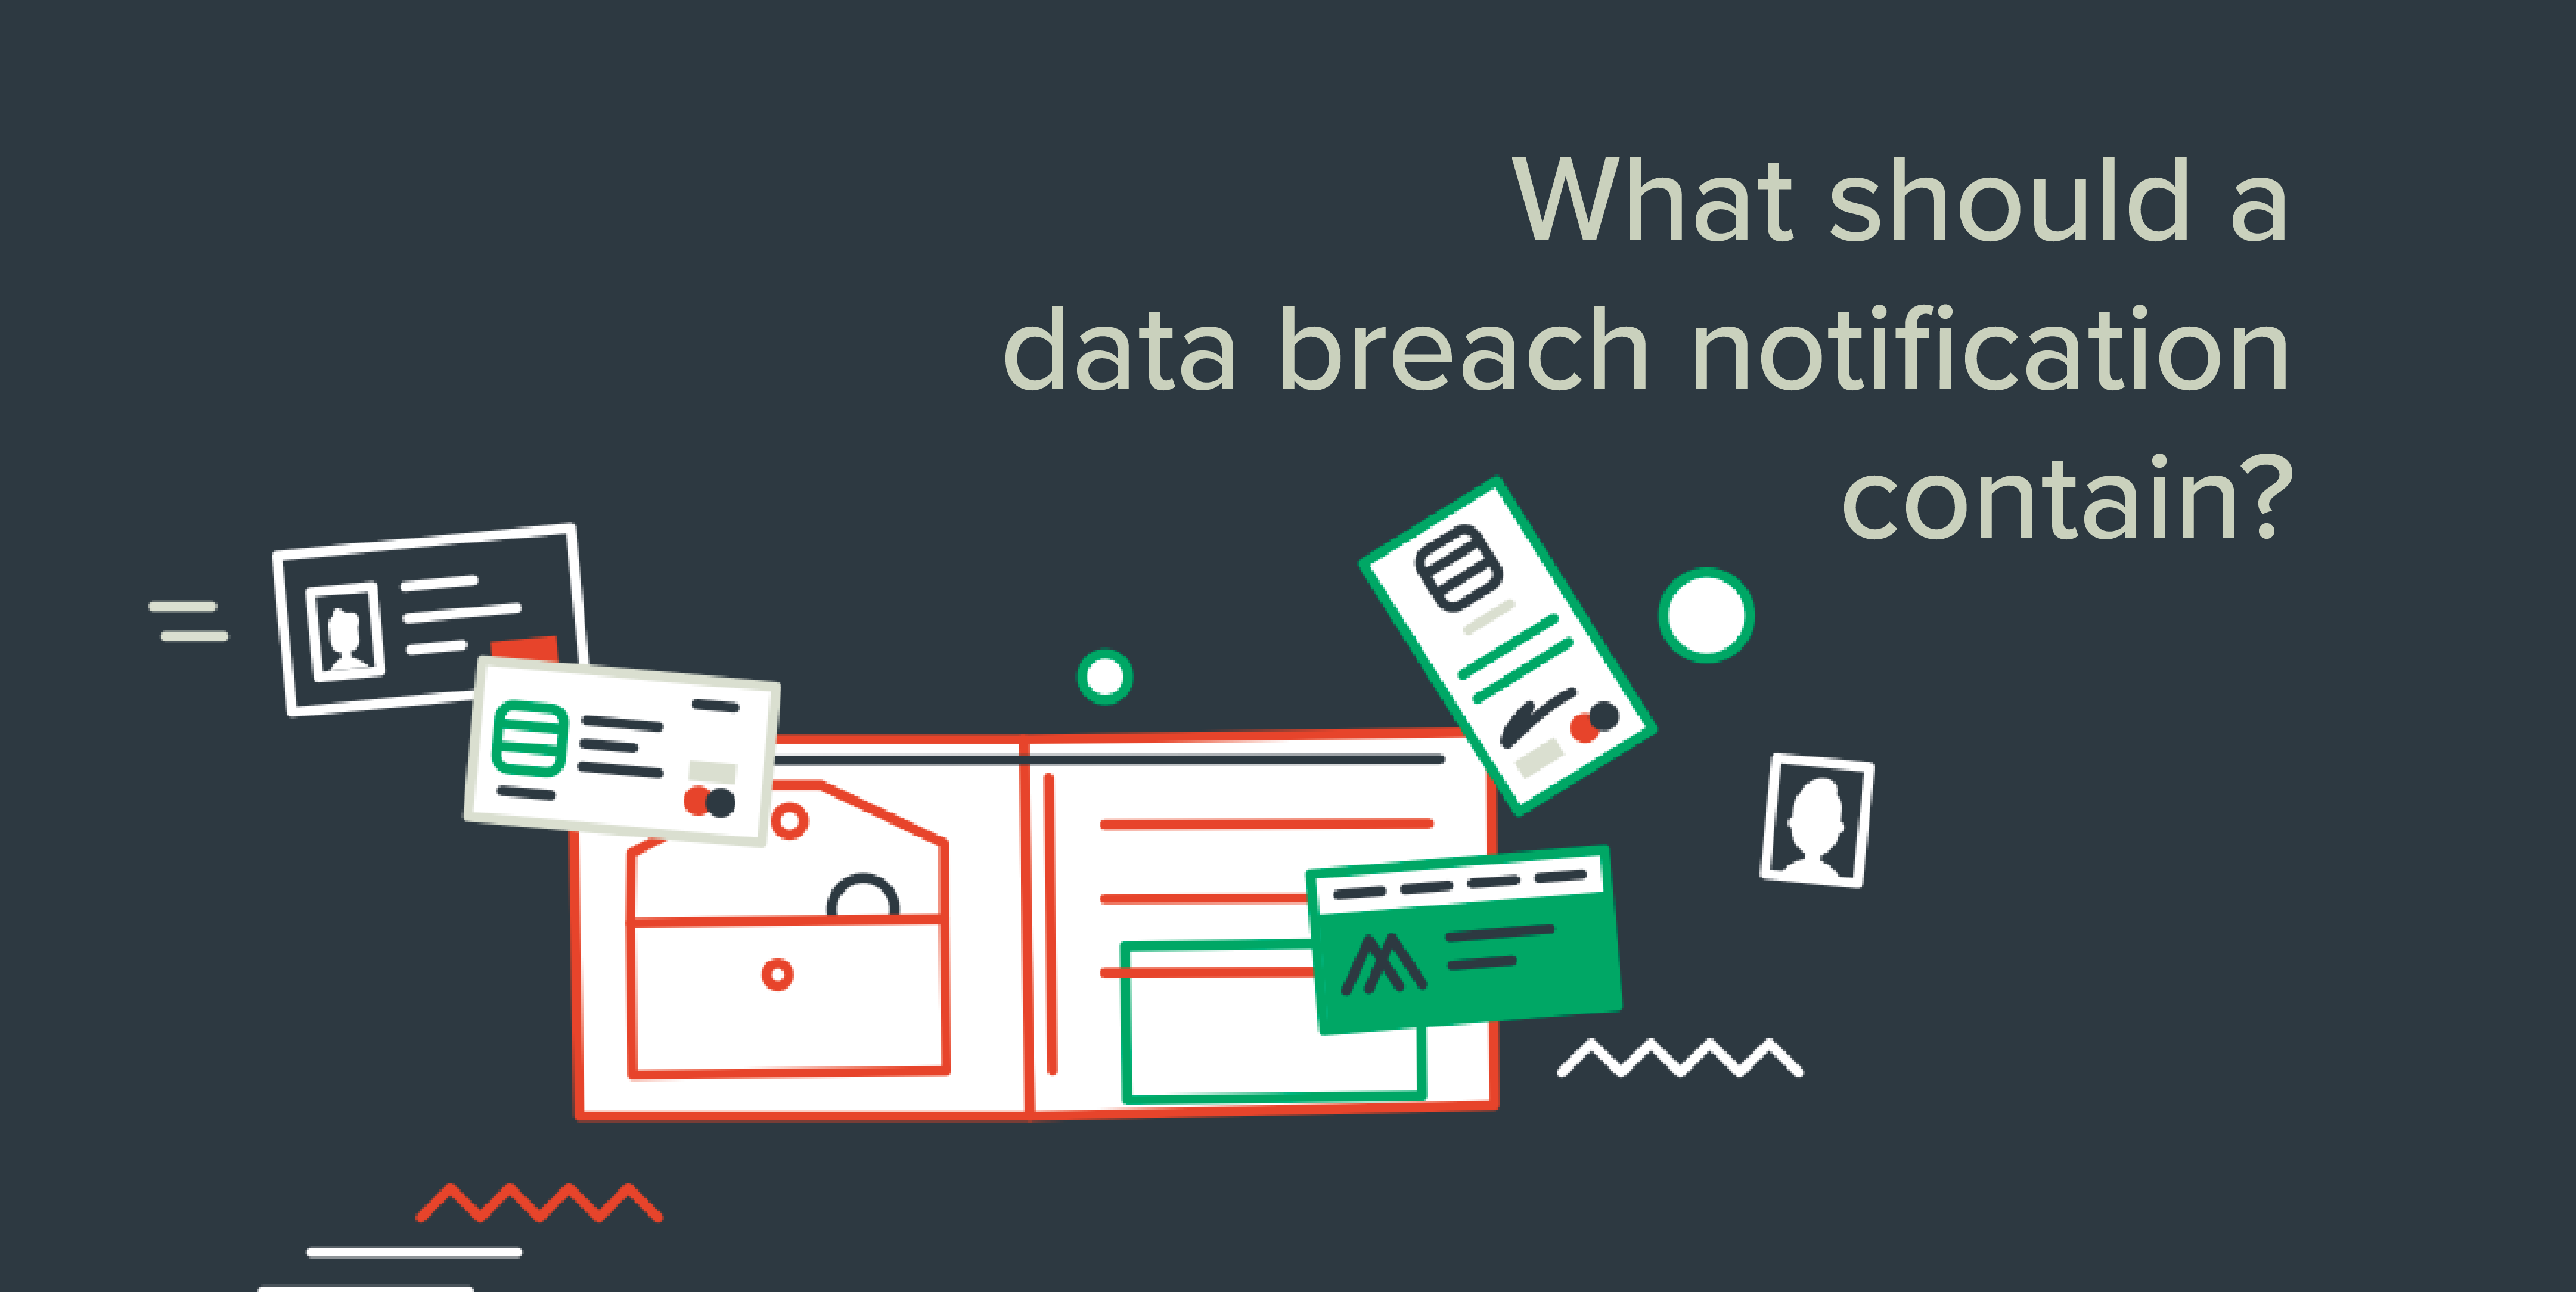 What should a data breach notification contain?